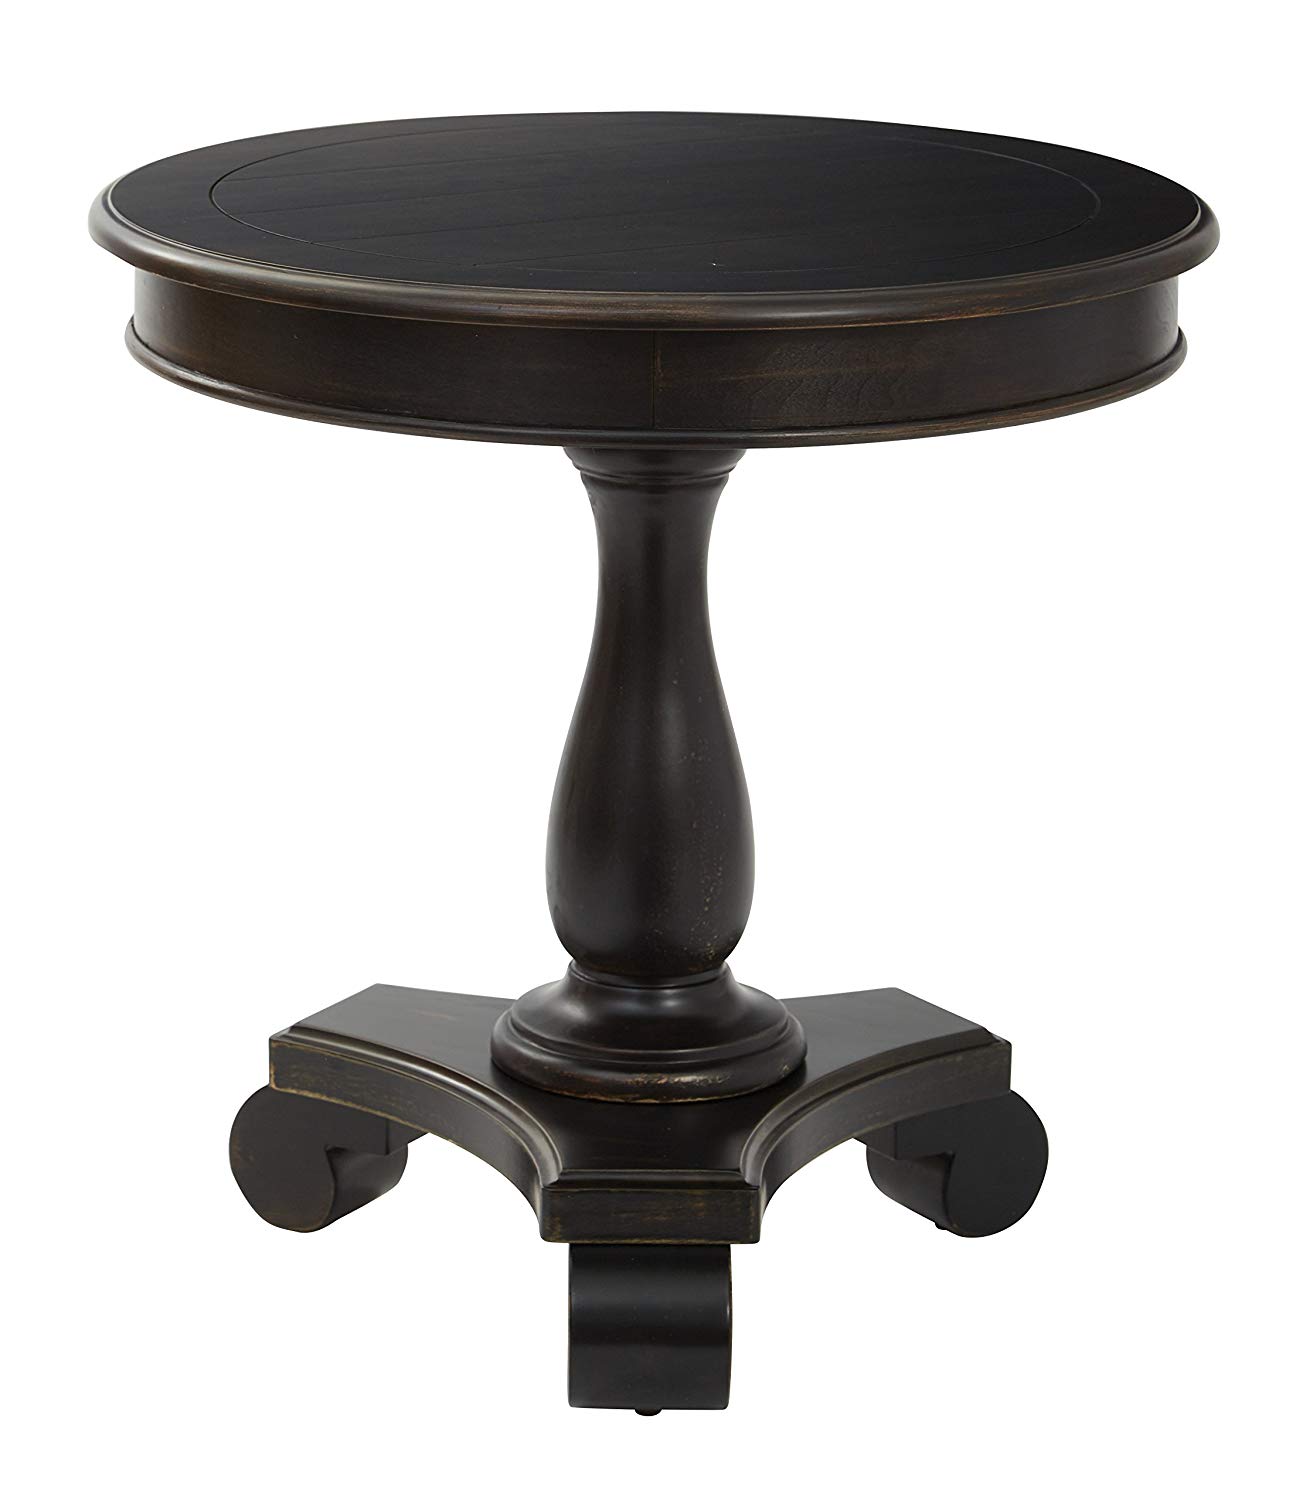 inspired bassett avlat osp avalon round antique accent table black kitchen dining sofa end height trunk bedside gold rimmed coffee bedroom chair target island inches high drop